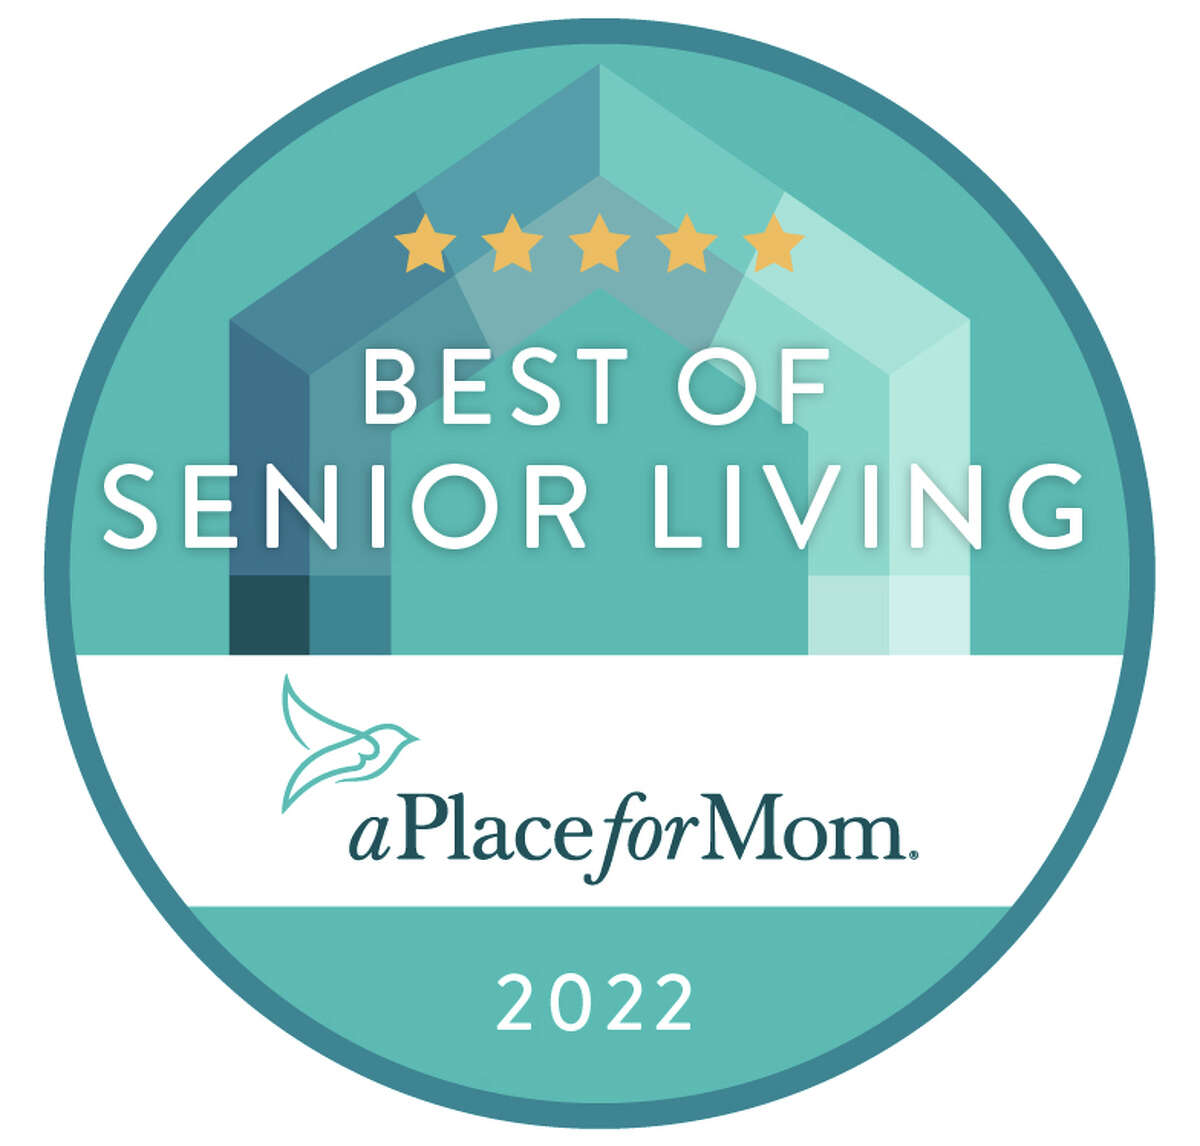 Candlestone received A Place for Mom’s 2022 Best of Senior Living Award.